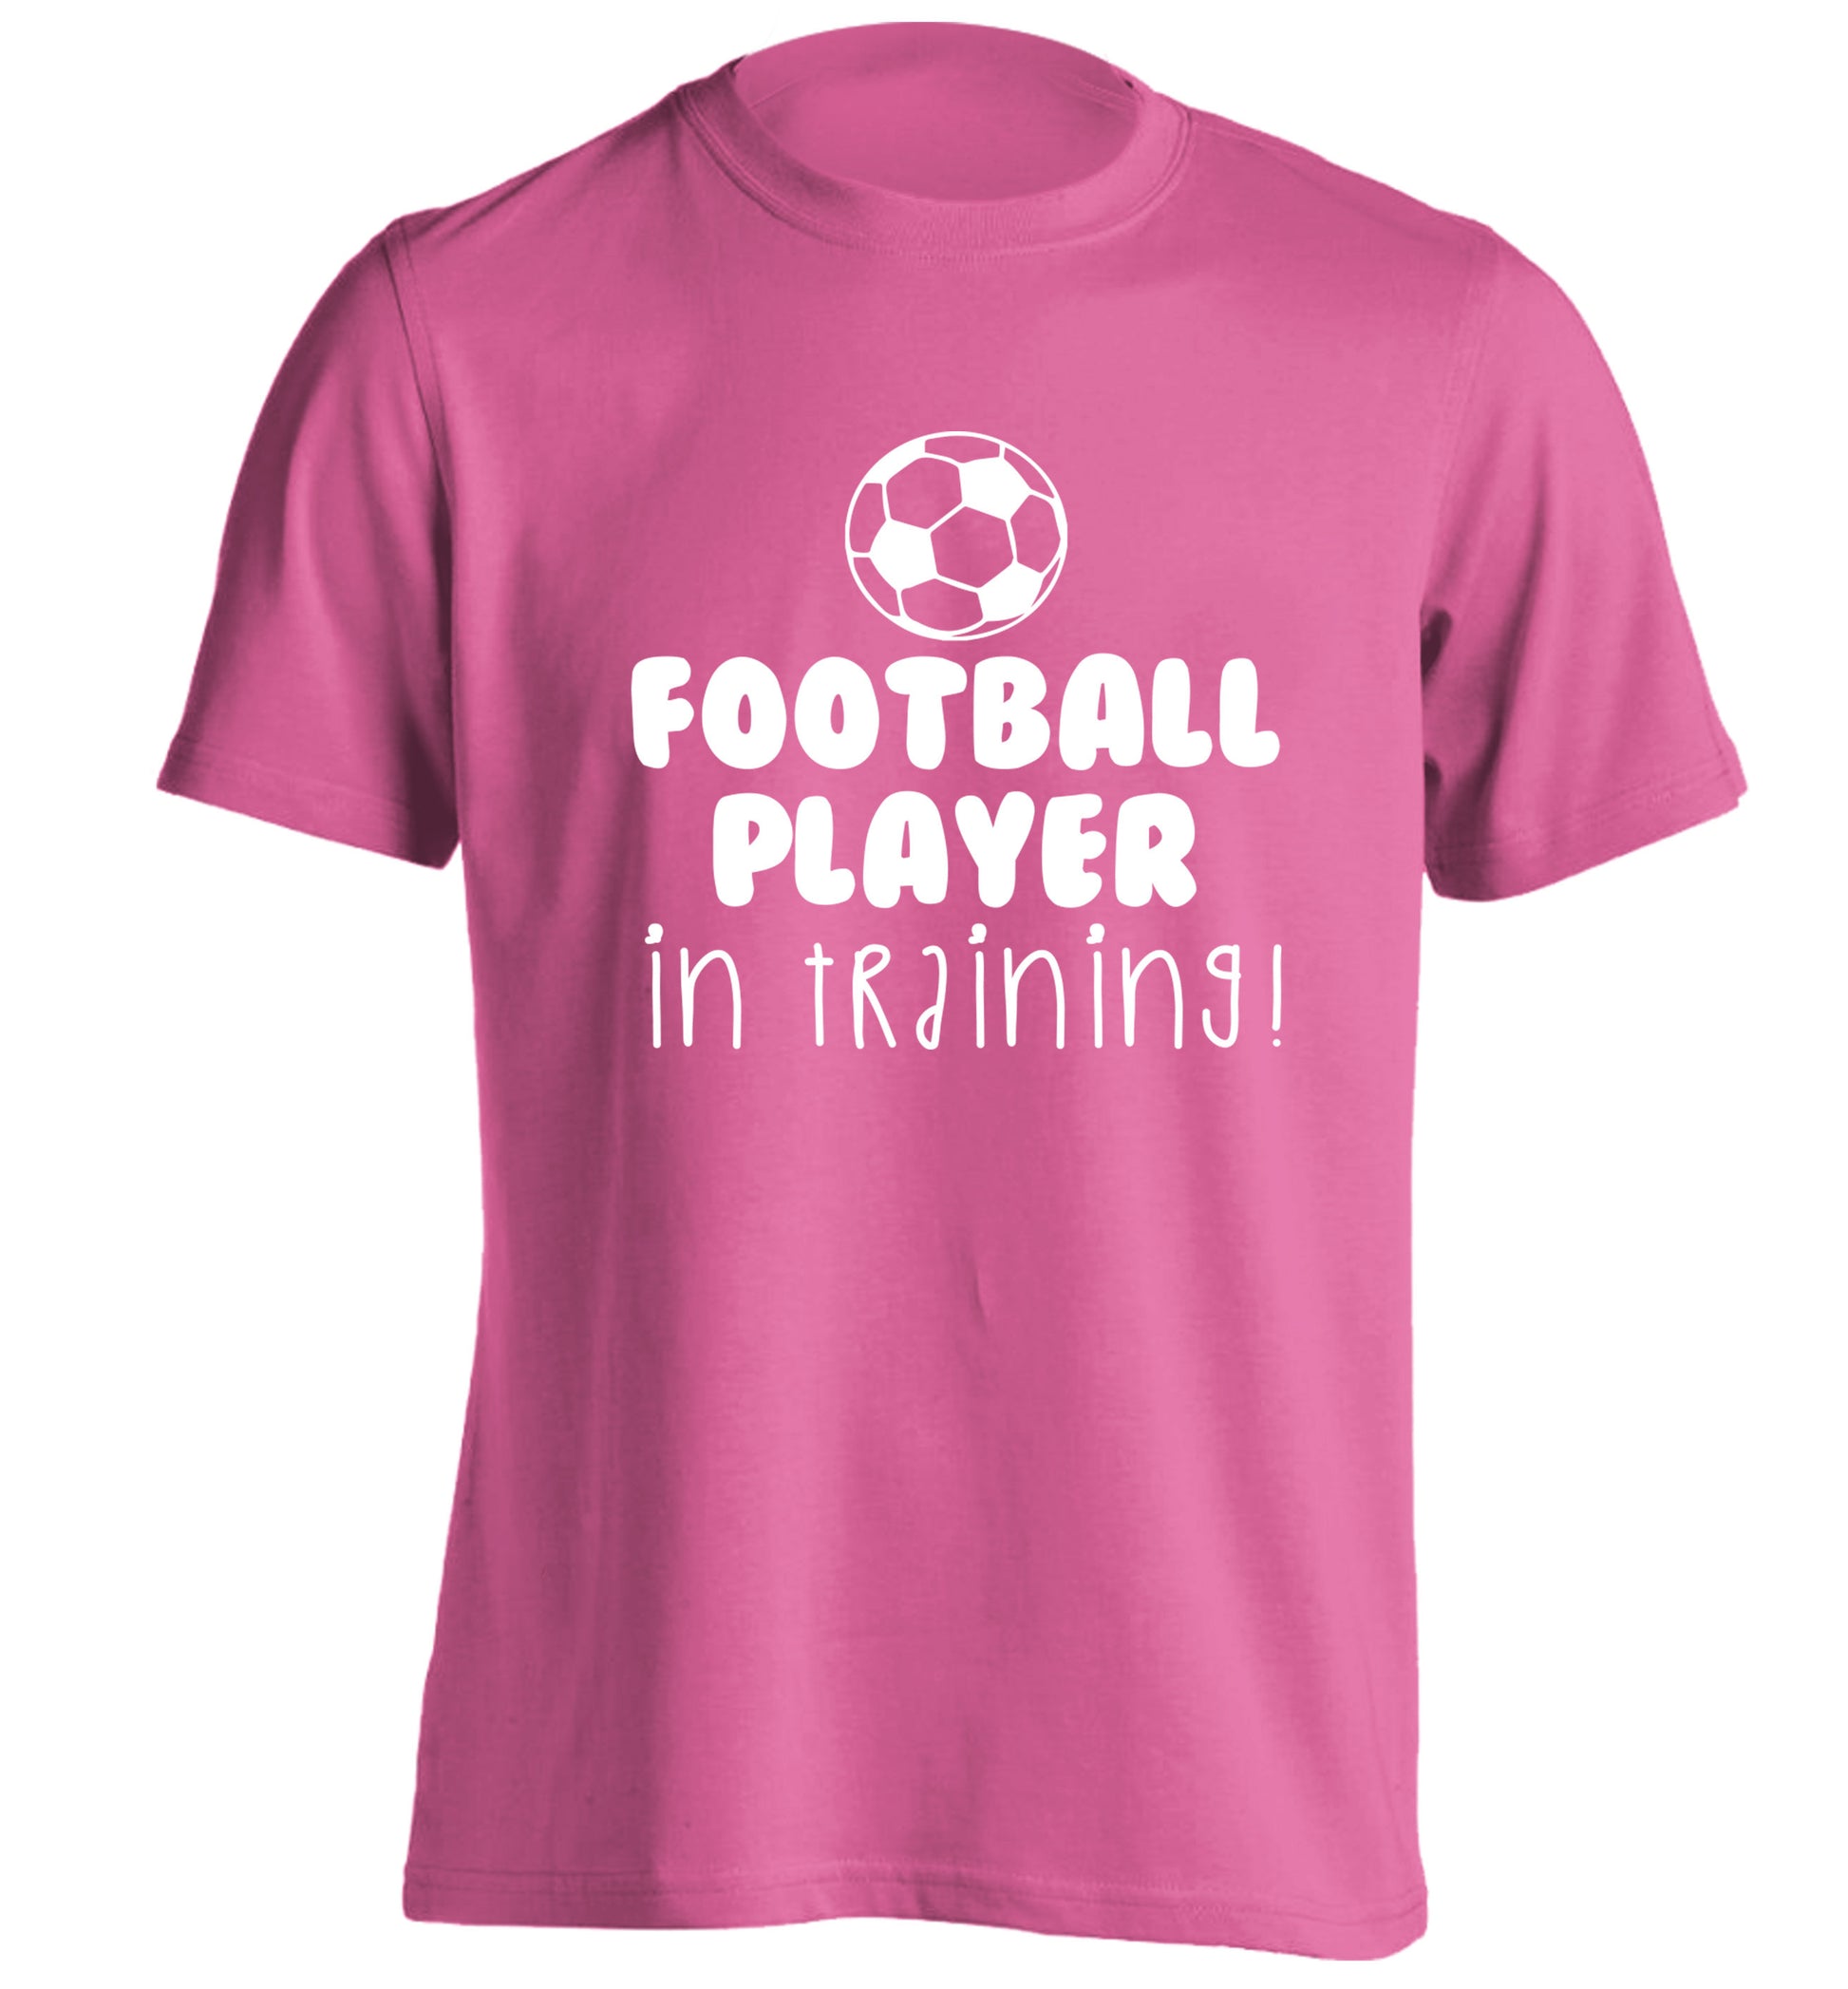 Football player in training adults unisex pink Tshirt 2XL